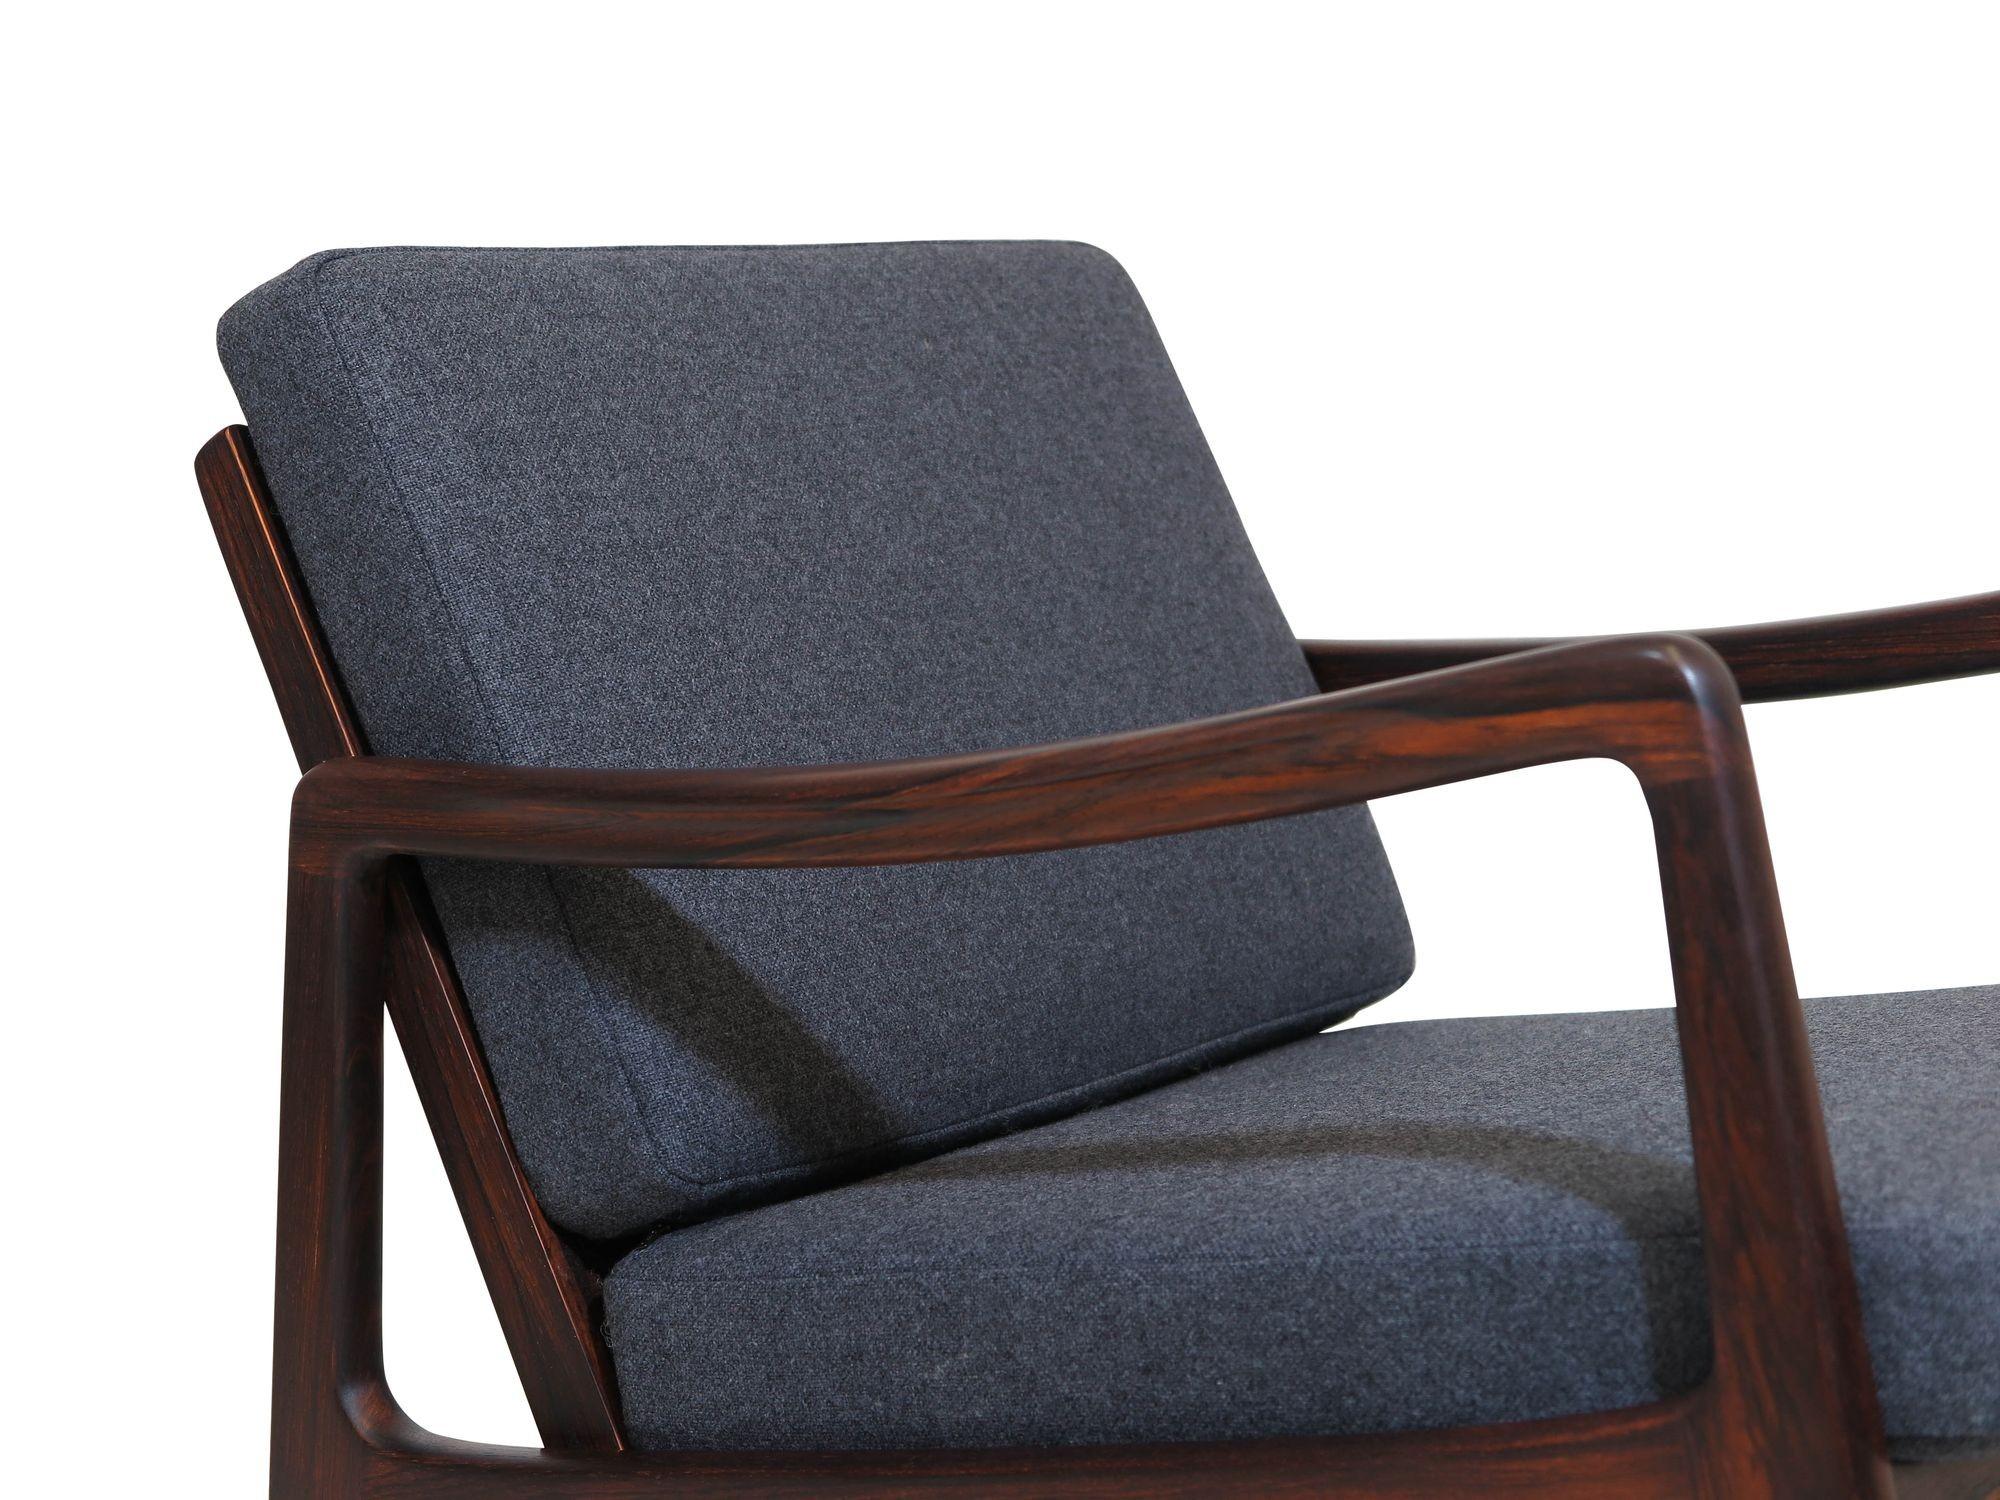 Oiled Ole Wanscher Brazilian Rosewood Danish Rocking Lounge Chair For Sale